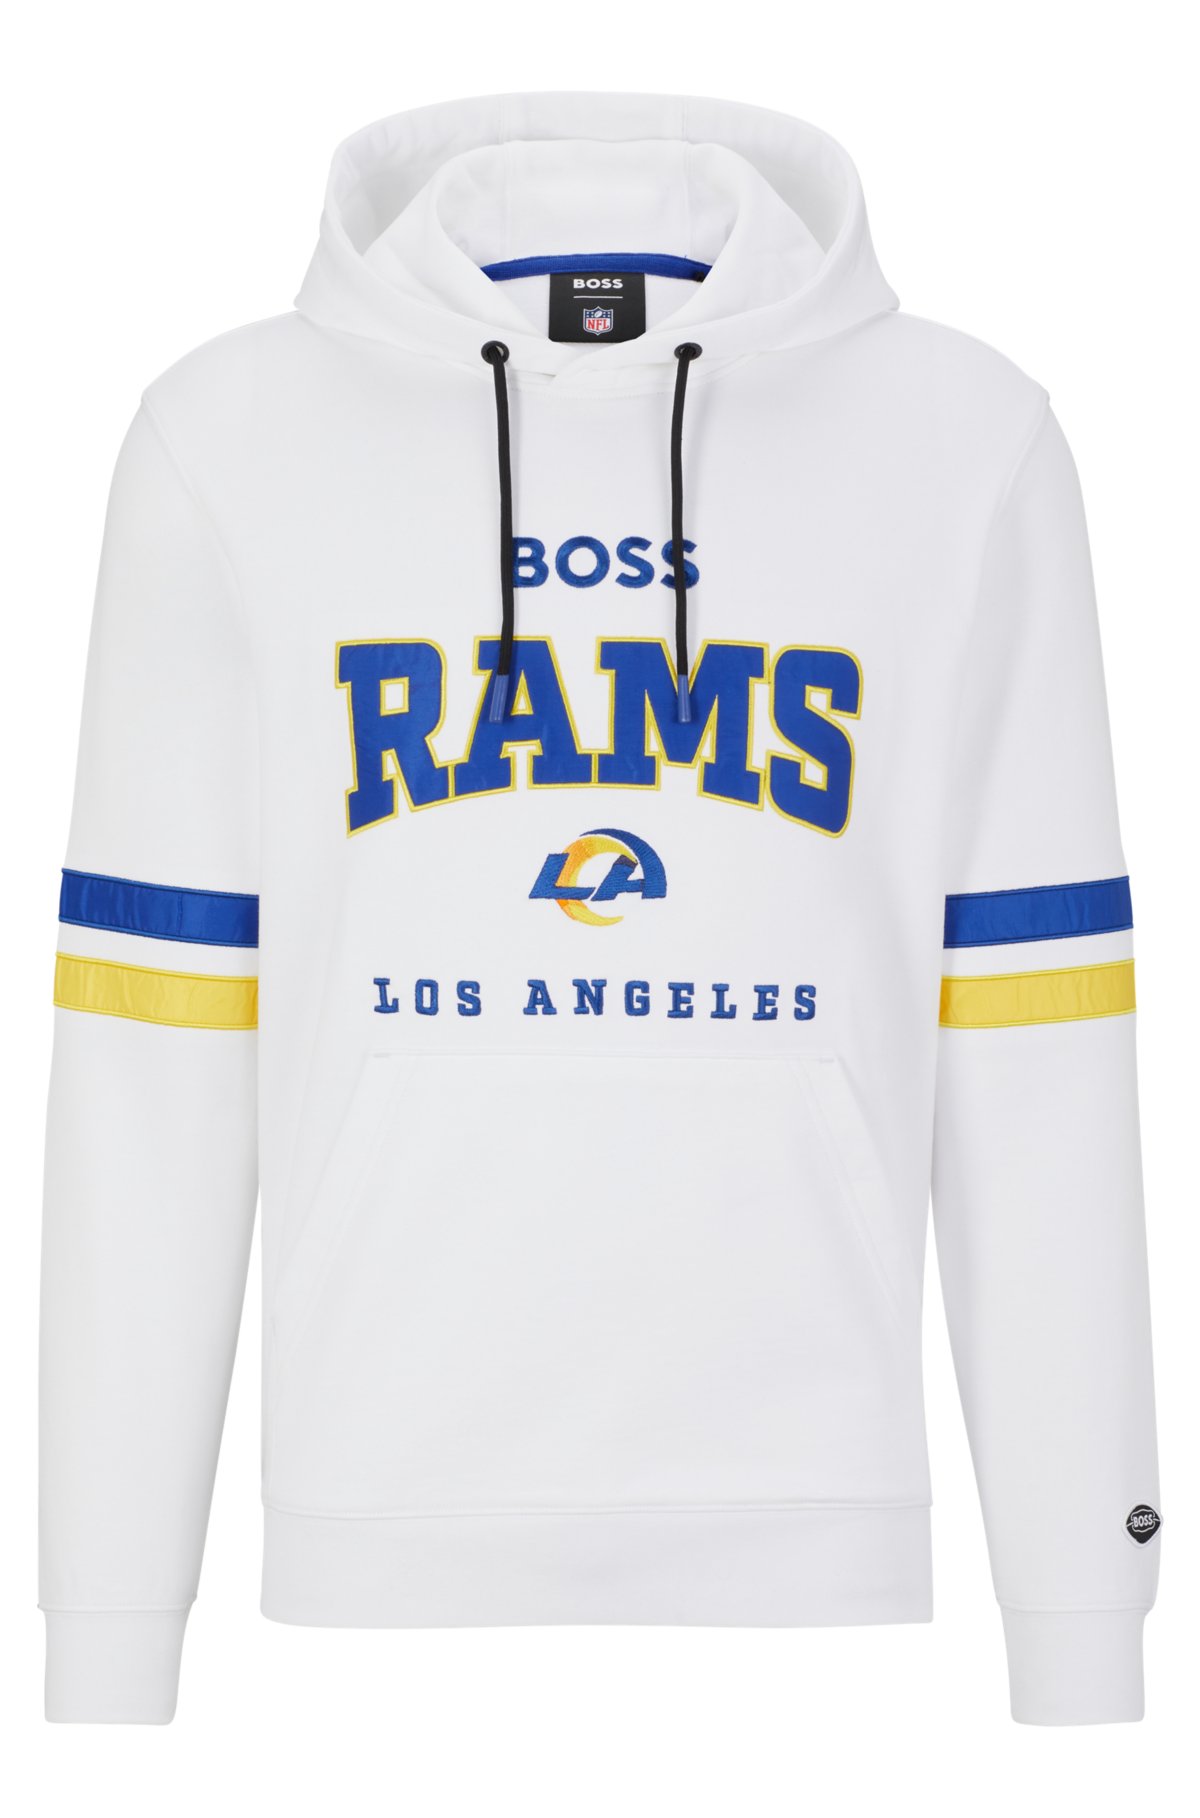 Men's Boss x NFL White/Royal Los Angeles Rams Touchdown Pullover Hoodie Size: Medium